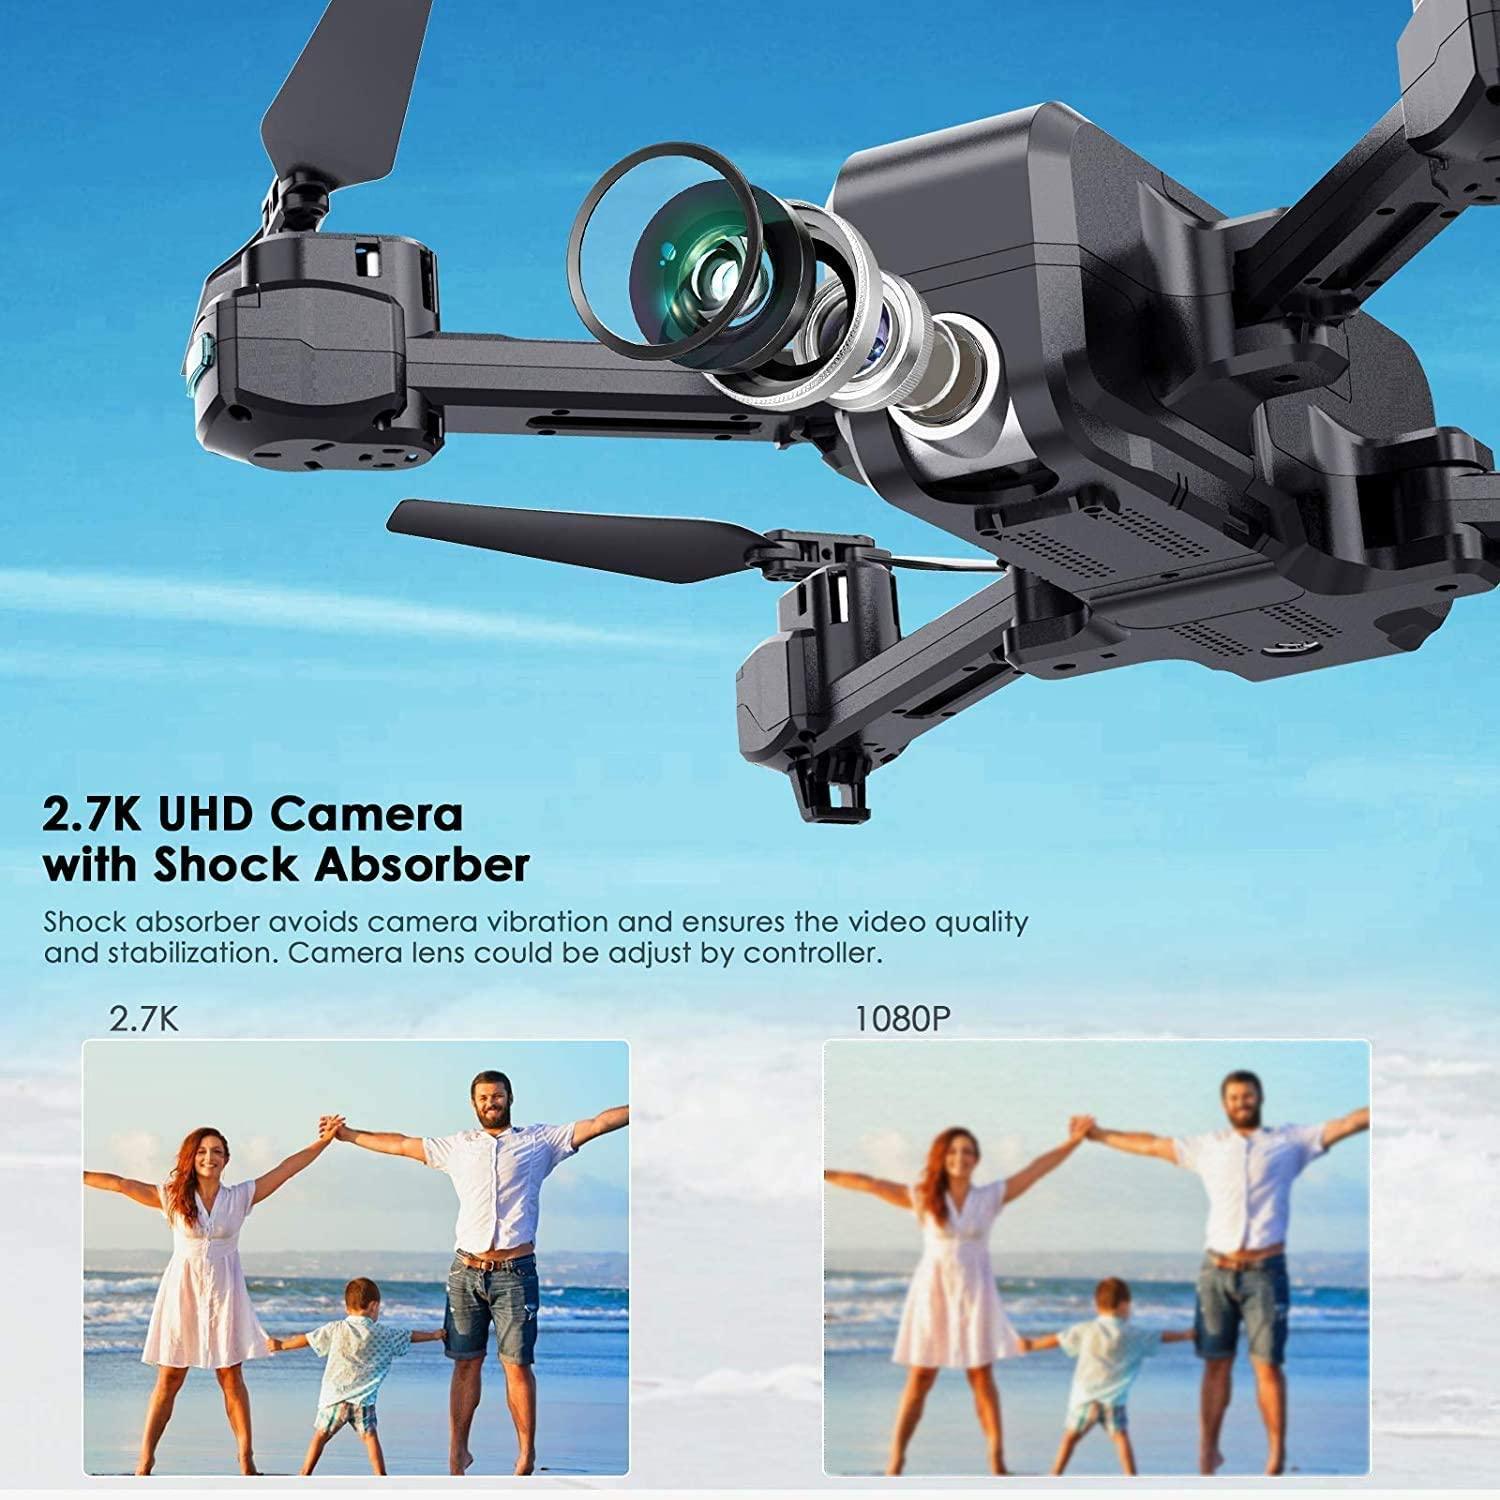 SANROCK X103W Drone - 2.7K UHD FPV Camera for Adults Kids, Live Video with 120° Wide Angle 90° Adjustable RC Quadcopter, Gesture Control, Altitude Hold, Route Mode, Headless Mode, Gravity Sensor - RCDrone